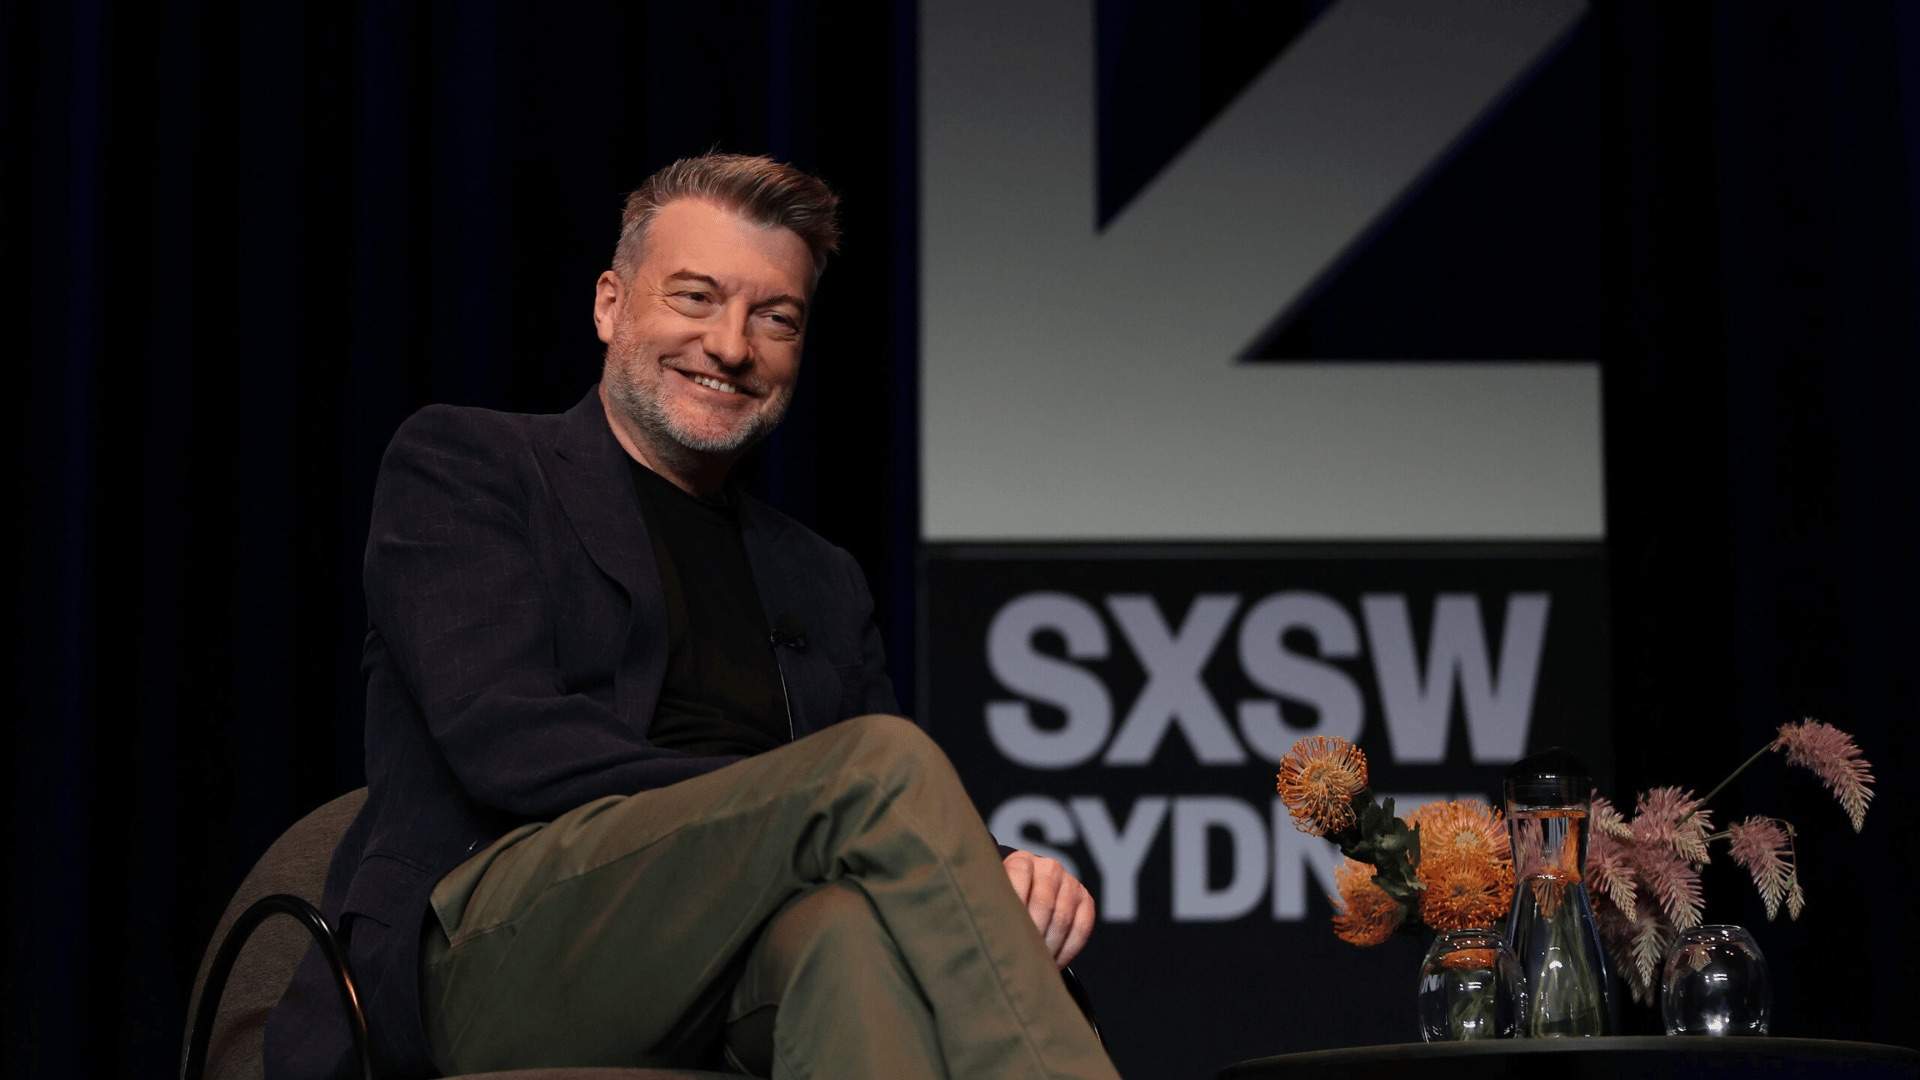 Charlie Brooker during his keynote session at SXSW Sydney.